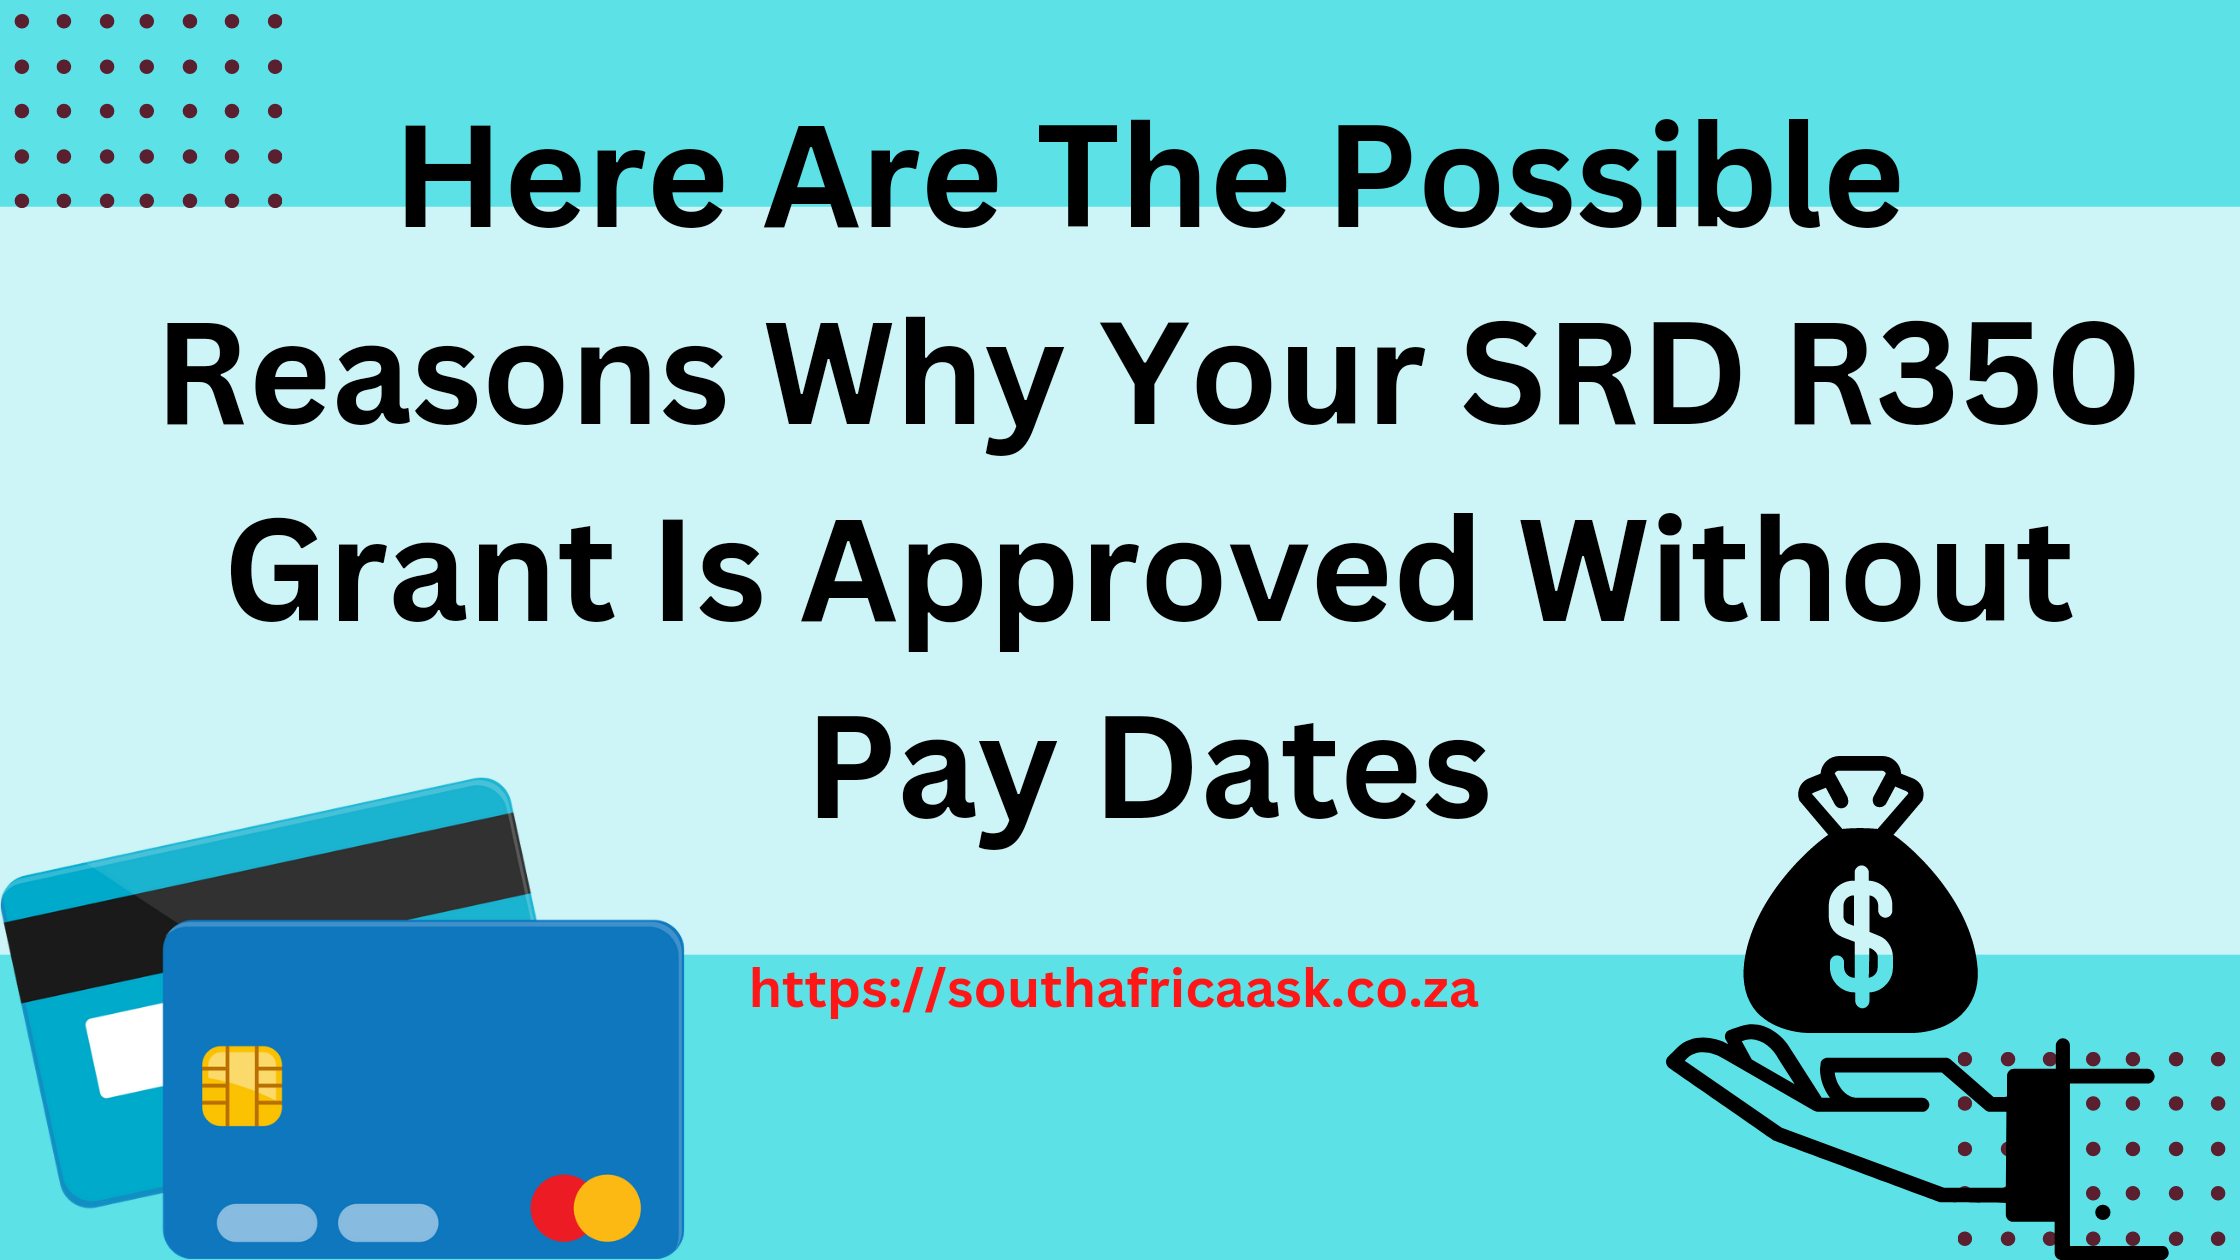 Here Are The Possible Reasons Why Your SRD R350 Grant Is Approved Without Pay Dates